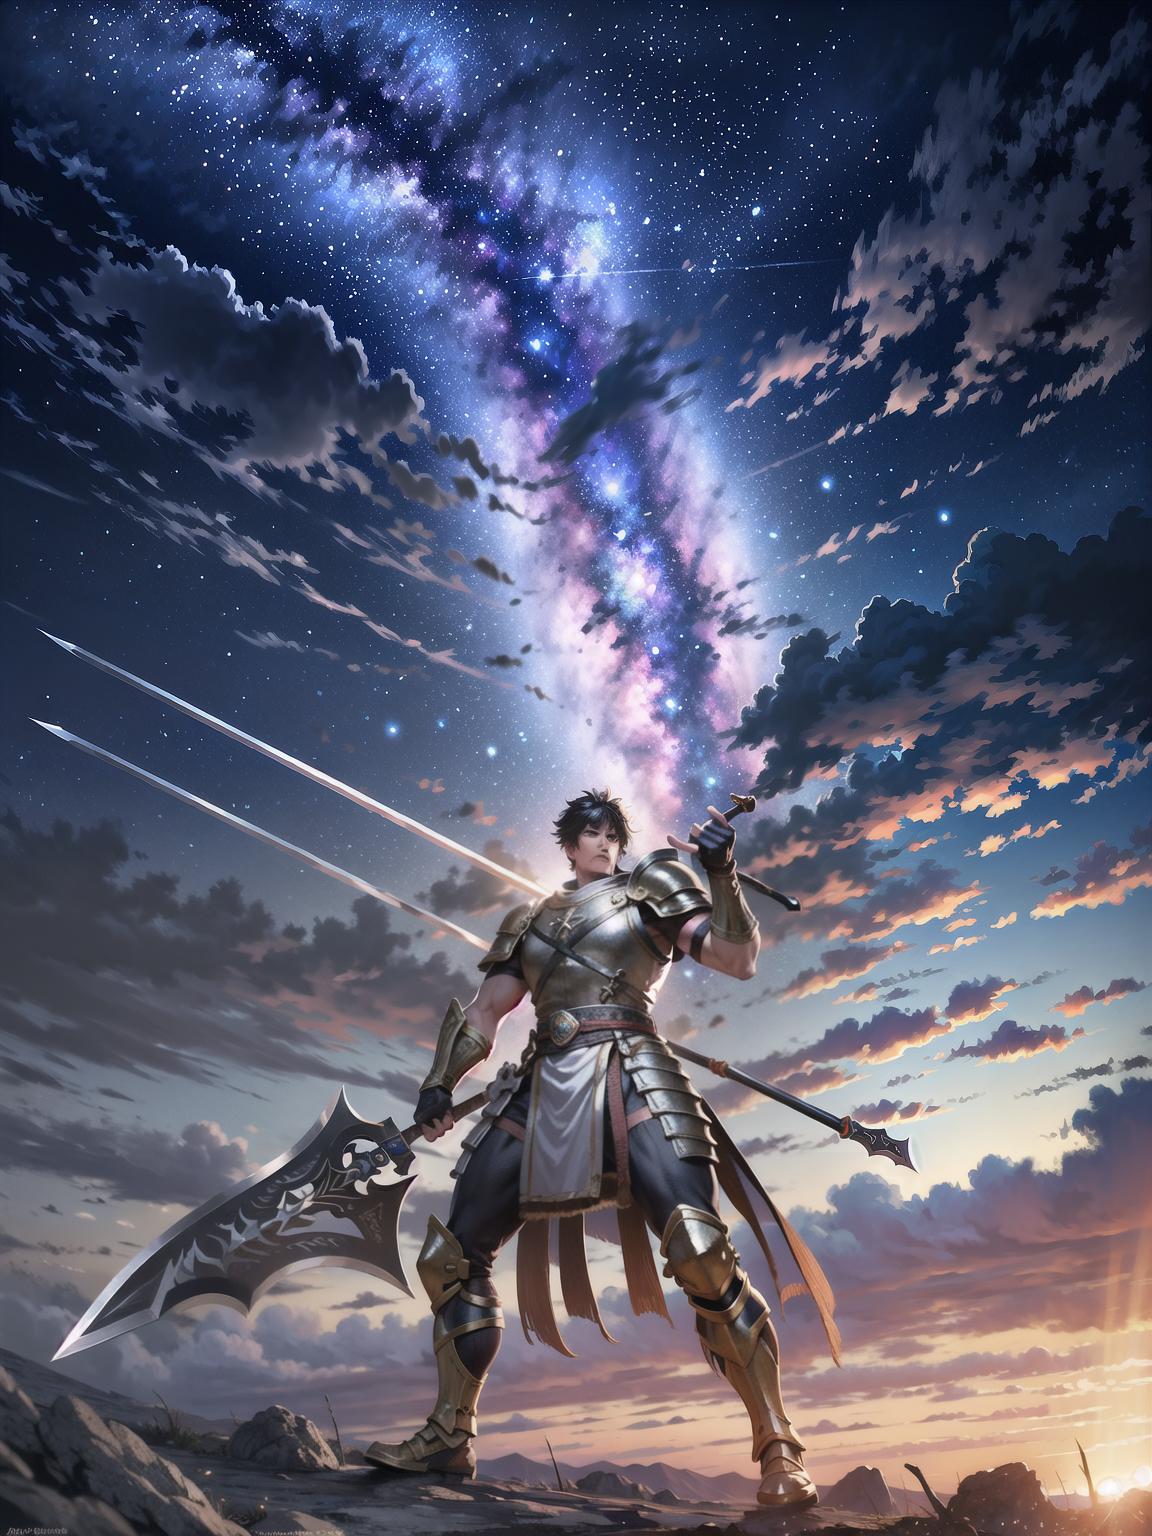  master piece, best quality, ultra detailed, highres, 4k.8k, Giant warrior, Wielding a massive axe, standing tall, Determined, BREAK Strength and power in battle., Rocky battlefield, Massive axe, boulders, rugged armor, BREAK Intense and fierce, Dust swirling, impact of axe striking, starry,strry light,night,colorful,cloud